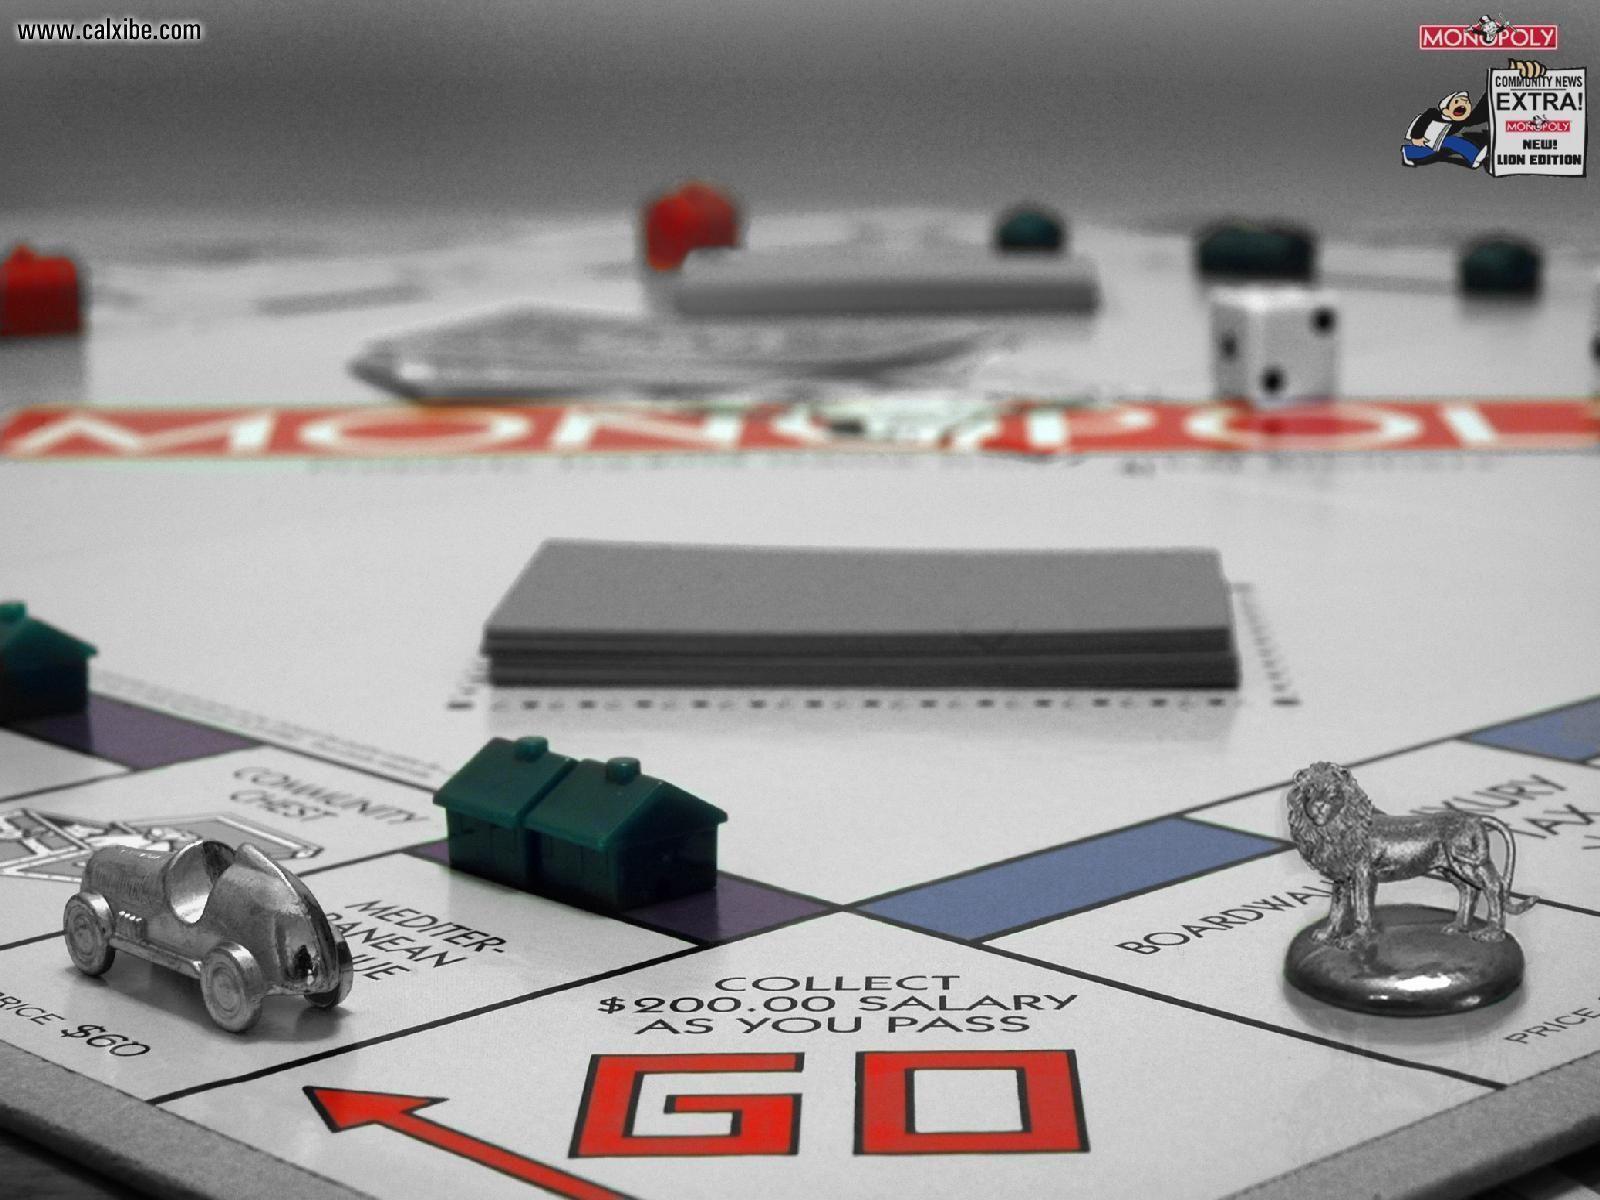 Miscellaneous: Teebo Monopoly, picture nr. 5545